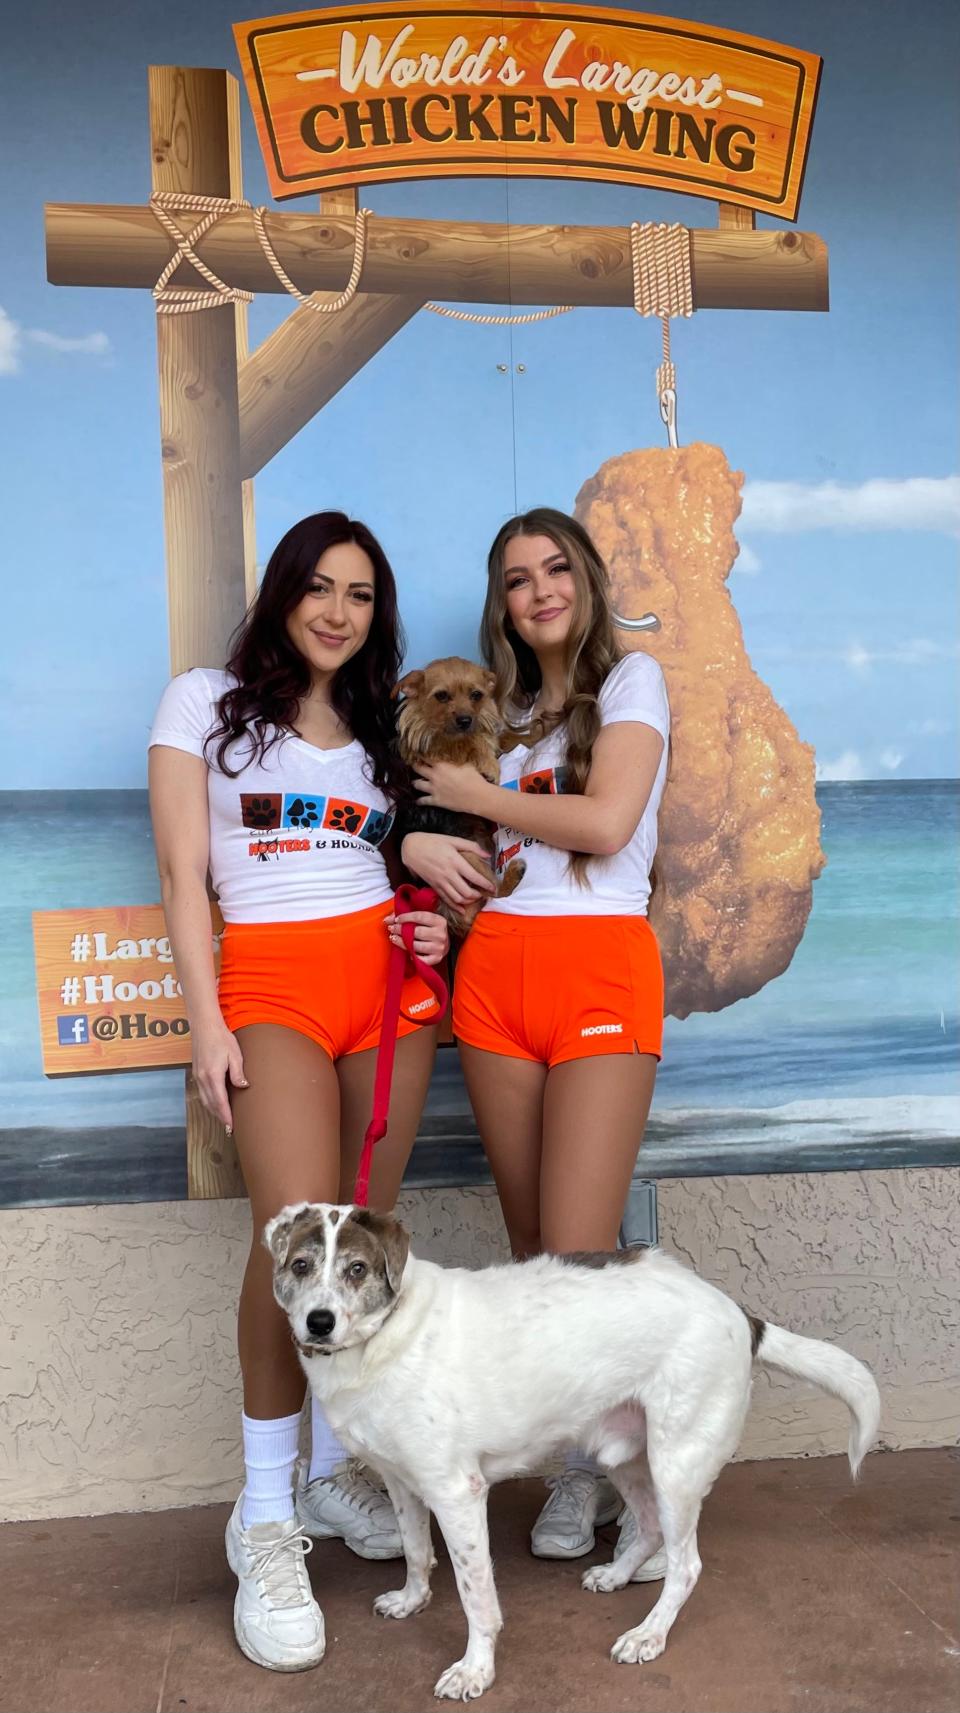 Find a new furry BFF during the adoption event at Hooters in Boca Raton this Valentine's Day.